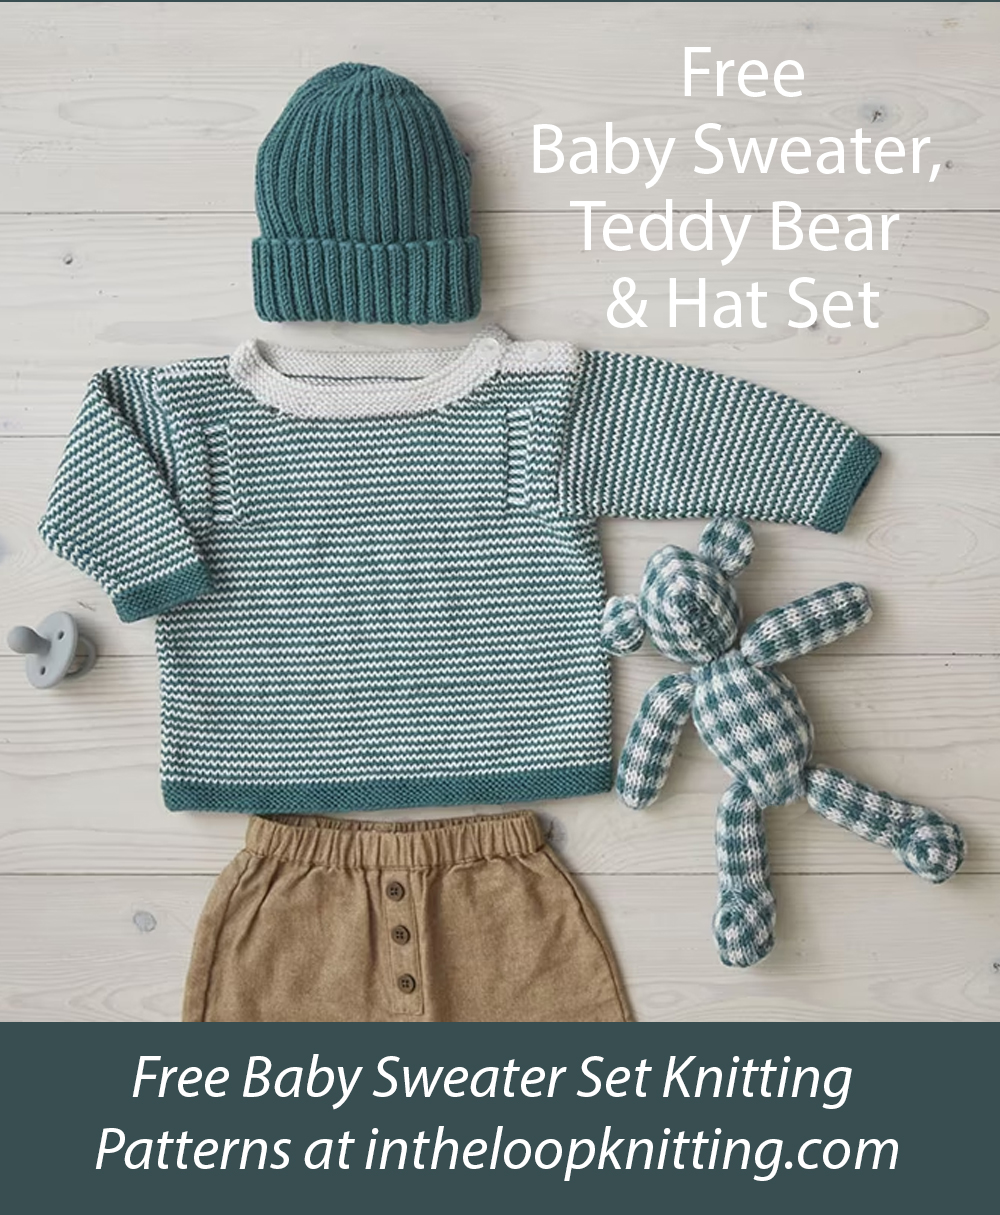 Free Check Your Stripes Baby Sweater, Teddy Bear and Hat Set Knitting Pattern